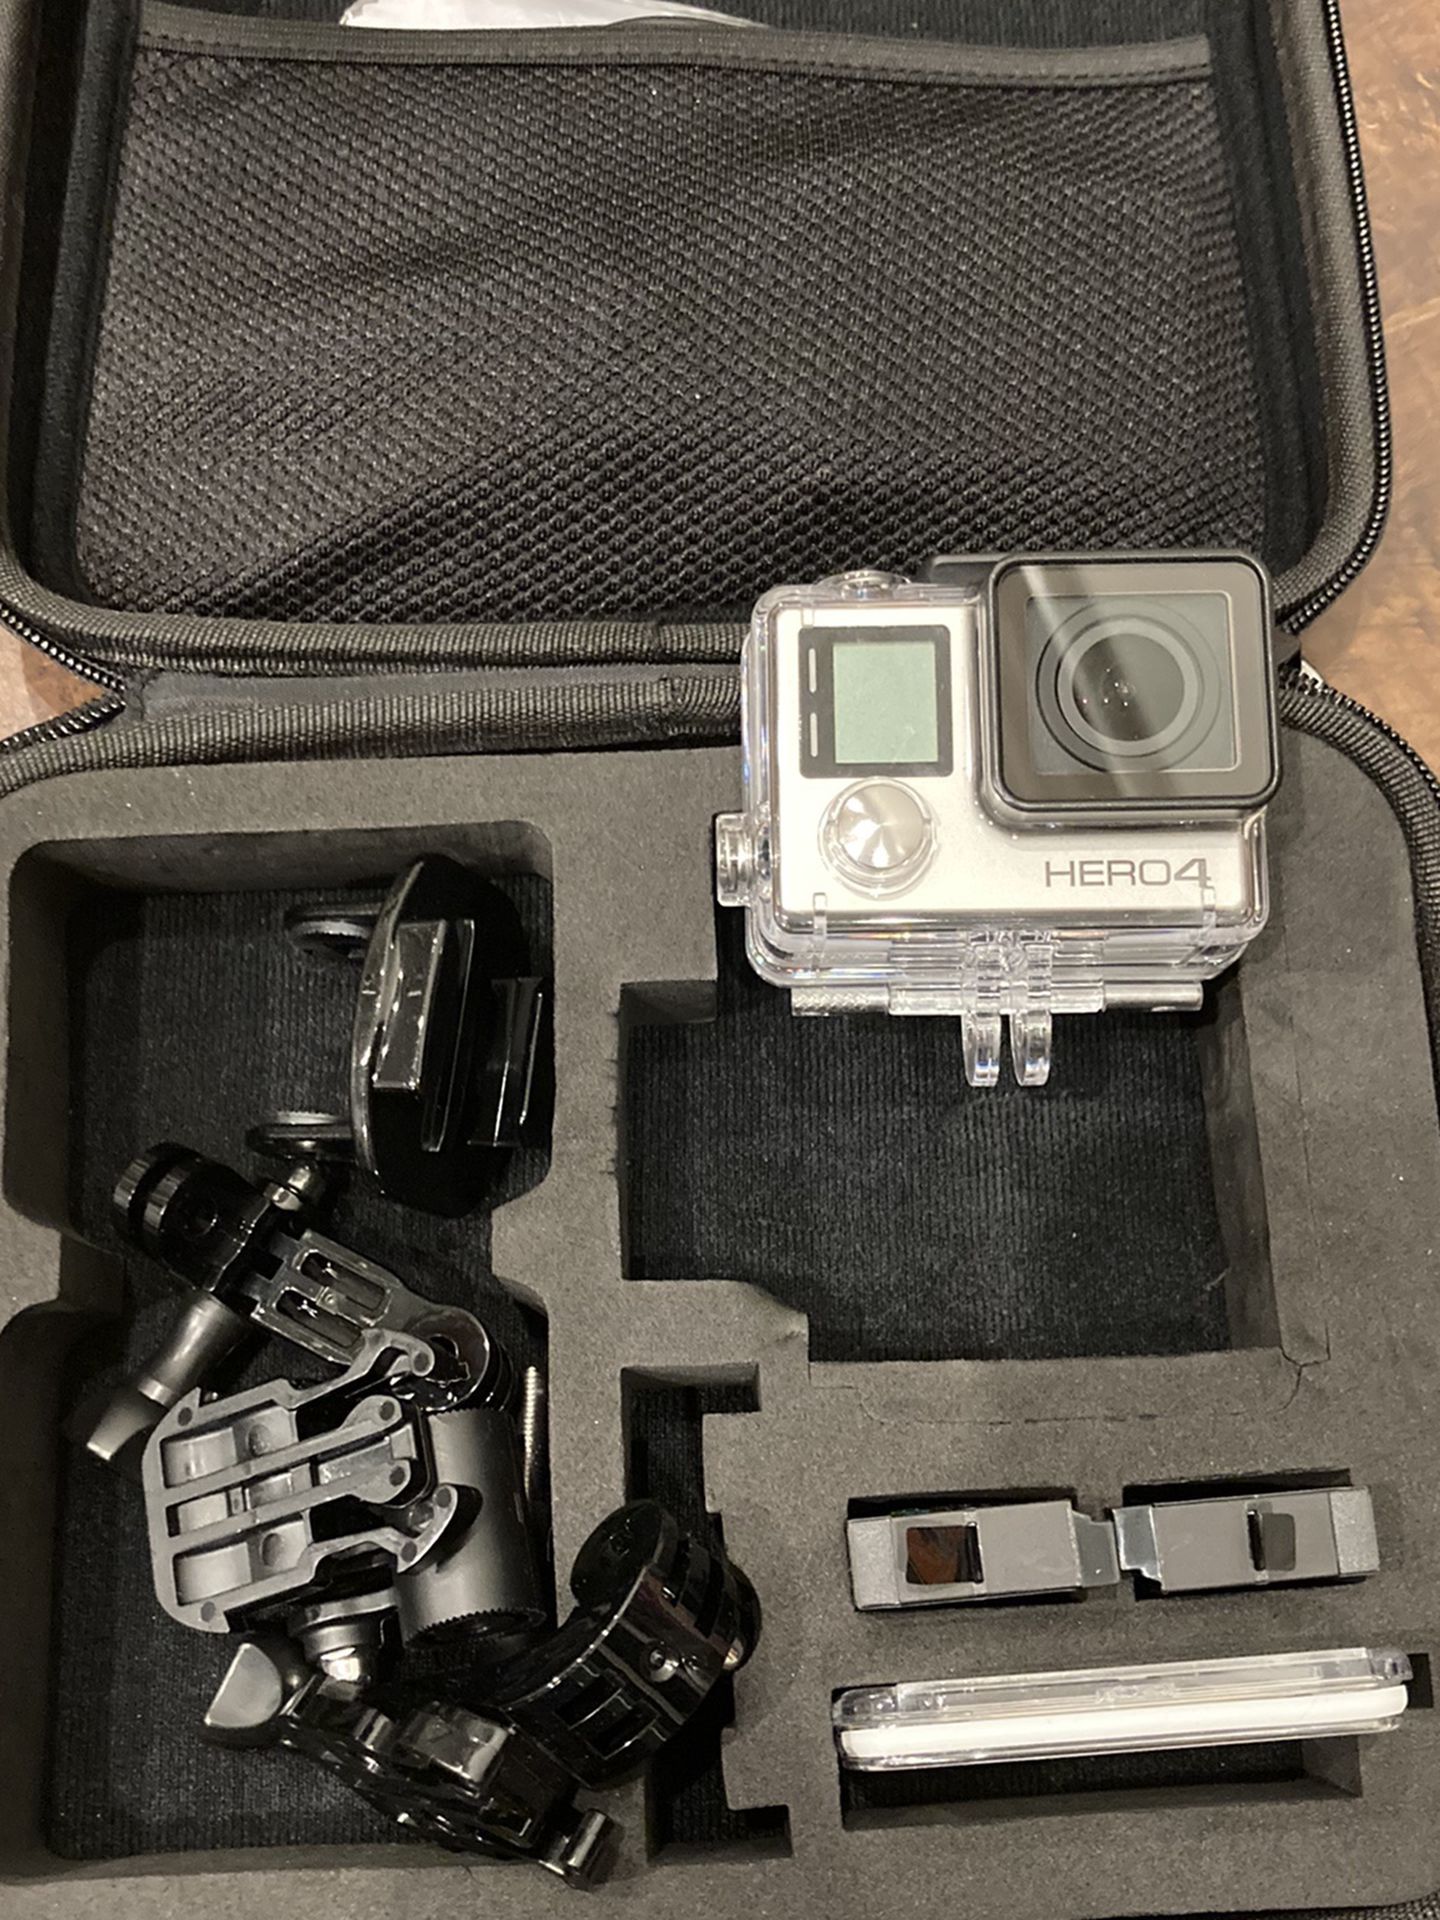 GoPro Hero 4 Silver with case, suction mount, charger, and extra batteries